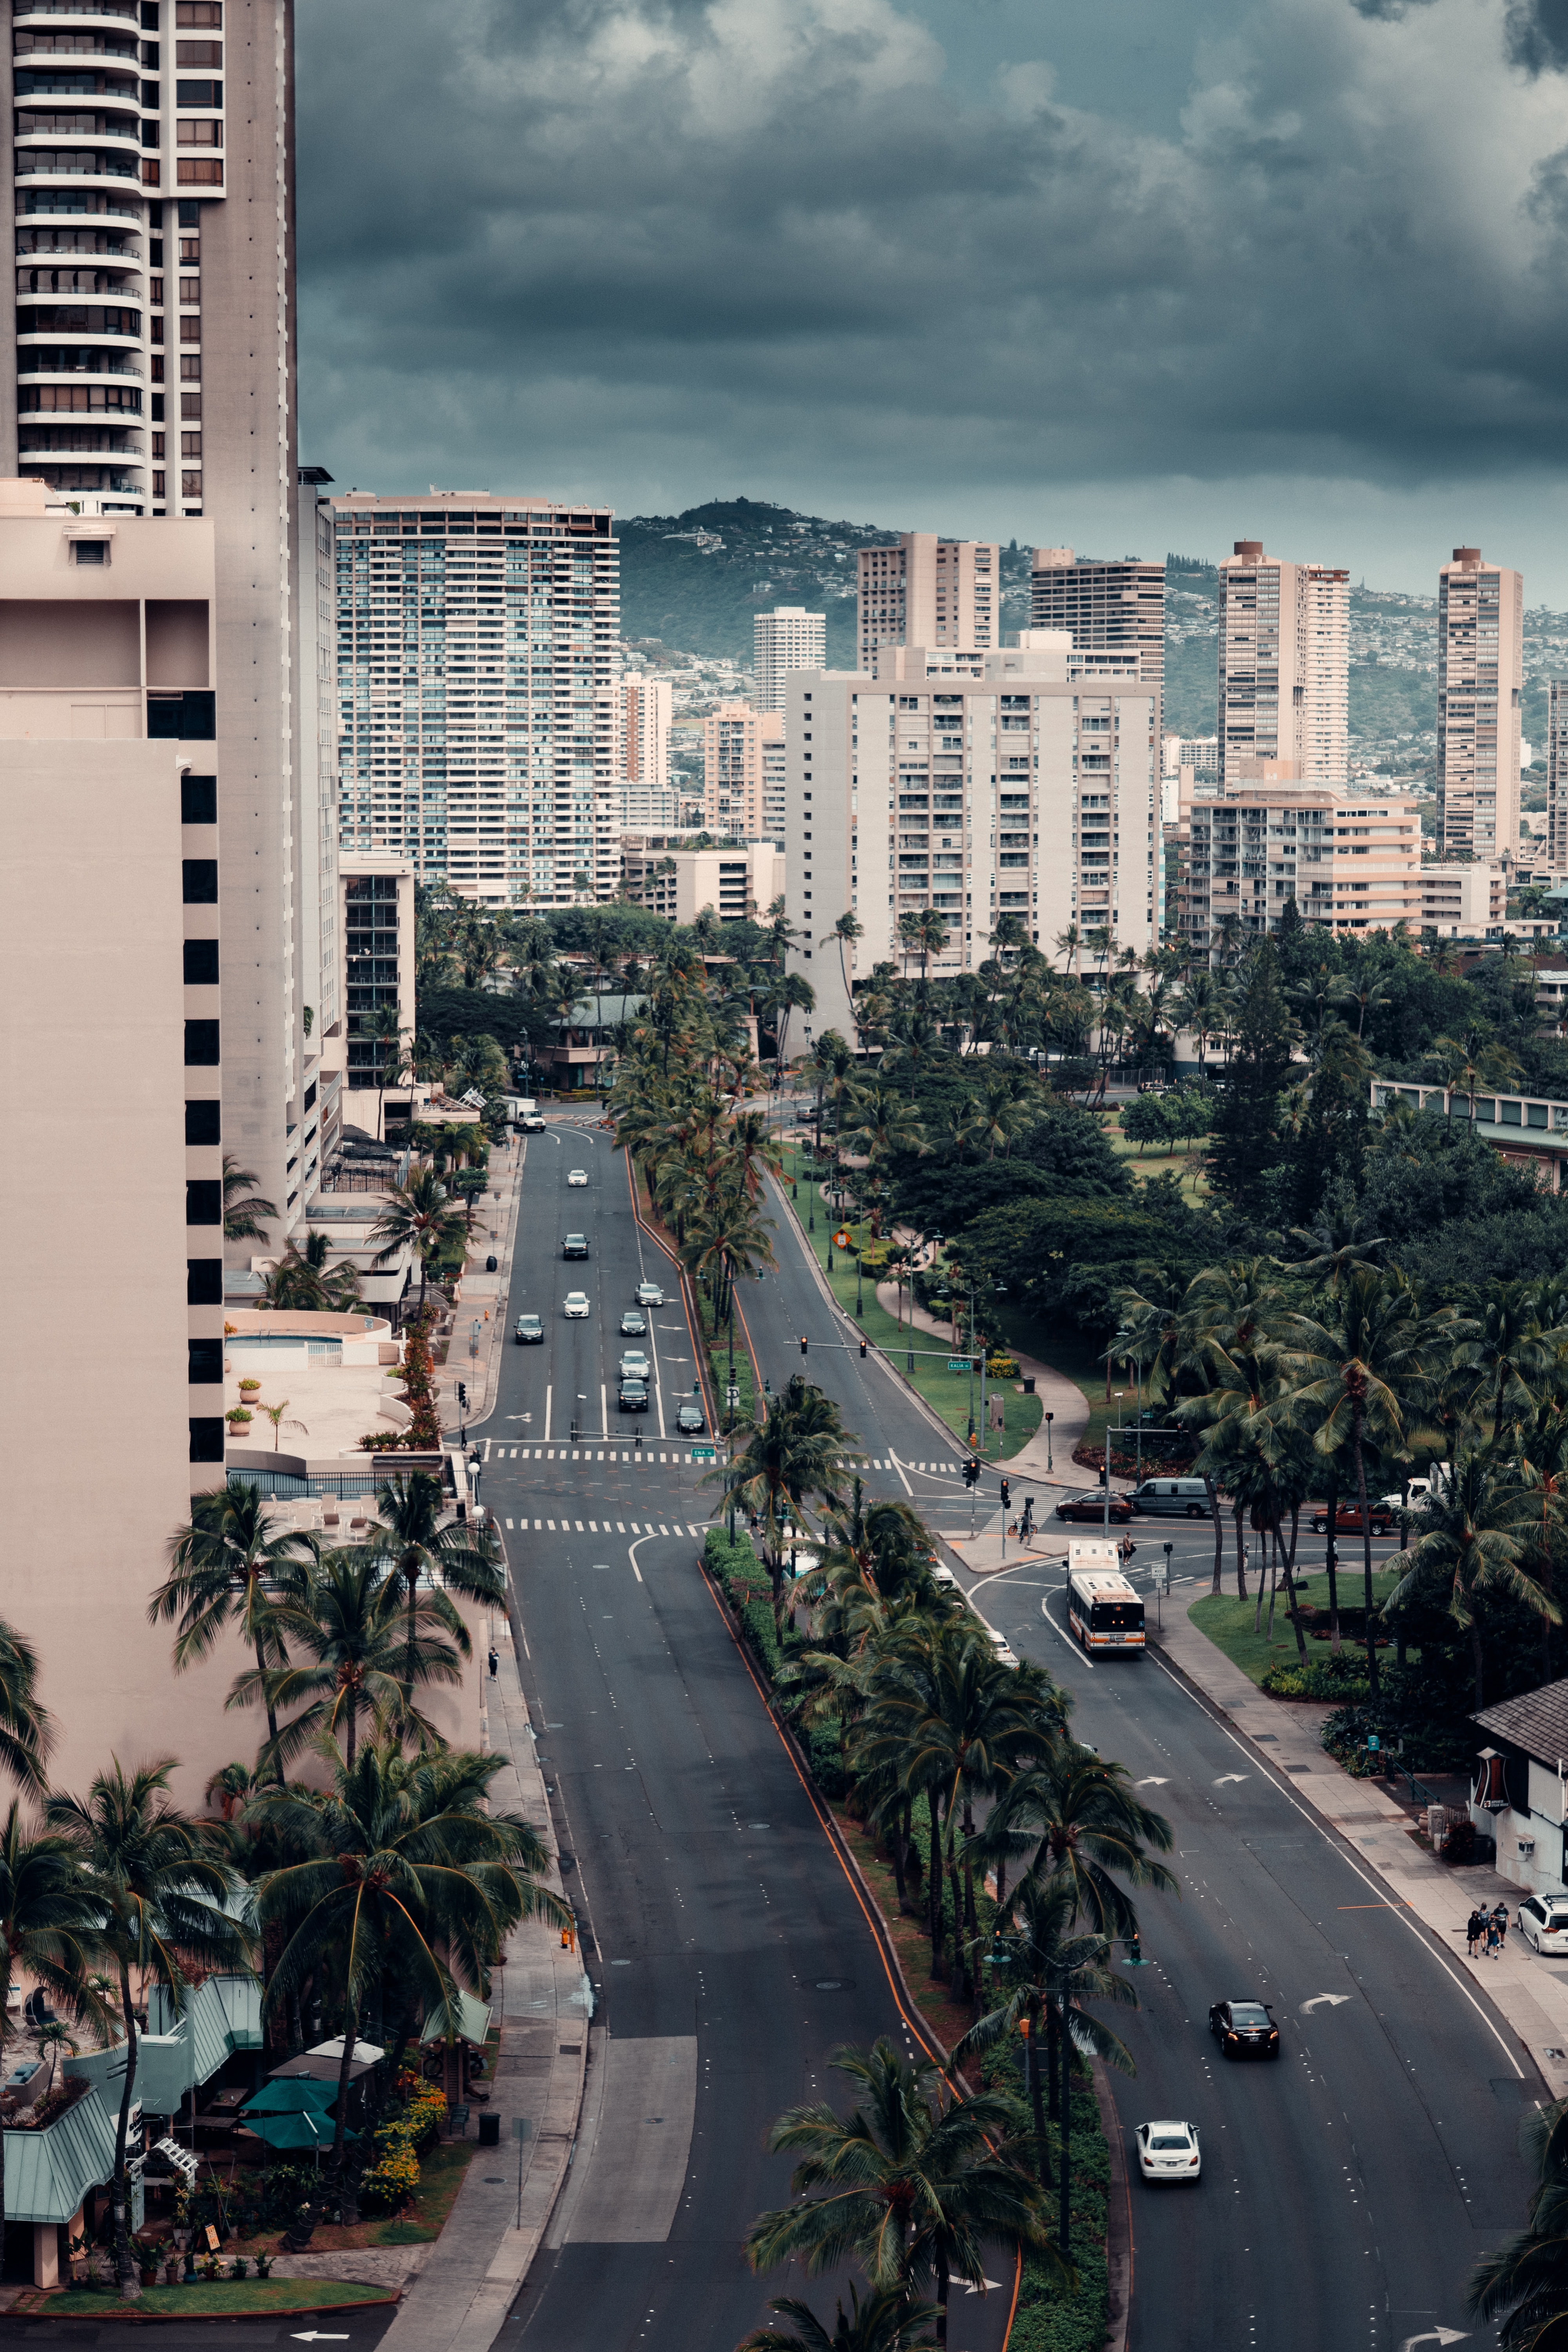 cities, palms, city, building, view from above, road 1080p